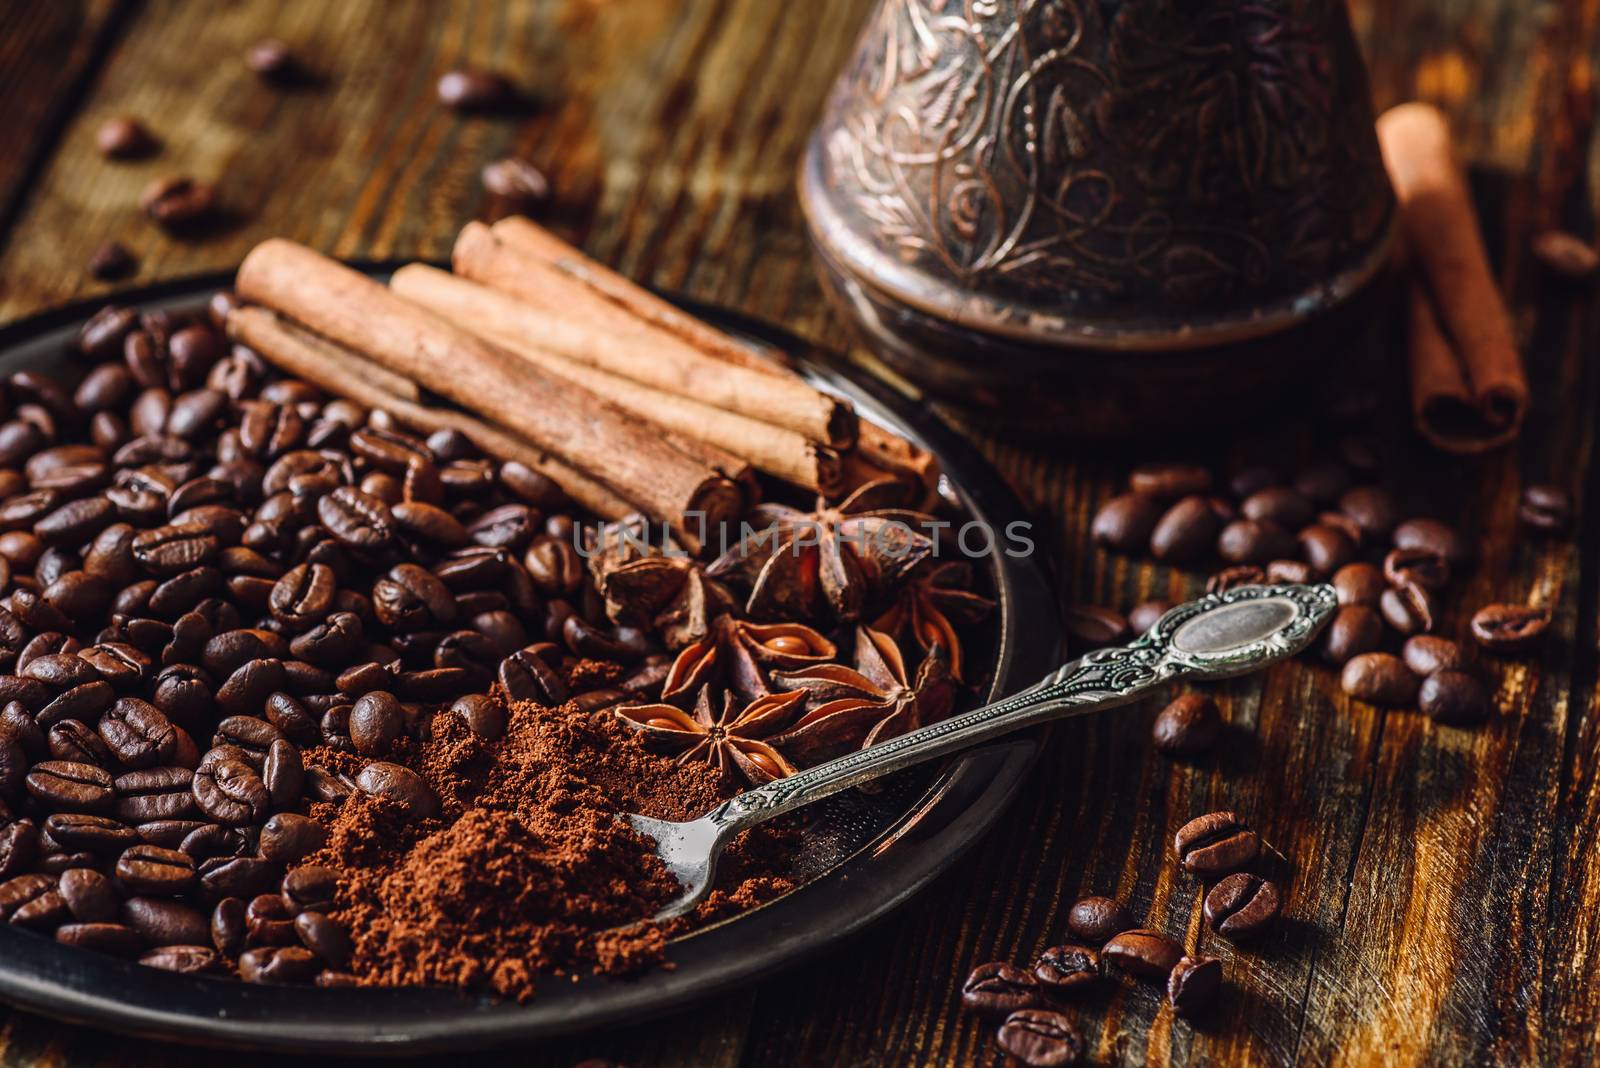 Coffee Beans with Spooonful of Ground Coffee, Cinnamon Sticks and Chinese Star Anise on Metal Plate. Beans Scattered on Wooden Table and Cezve on Backdrop.